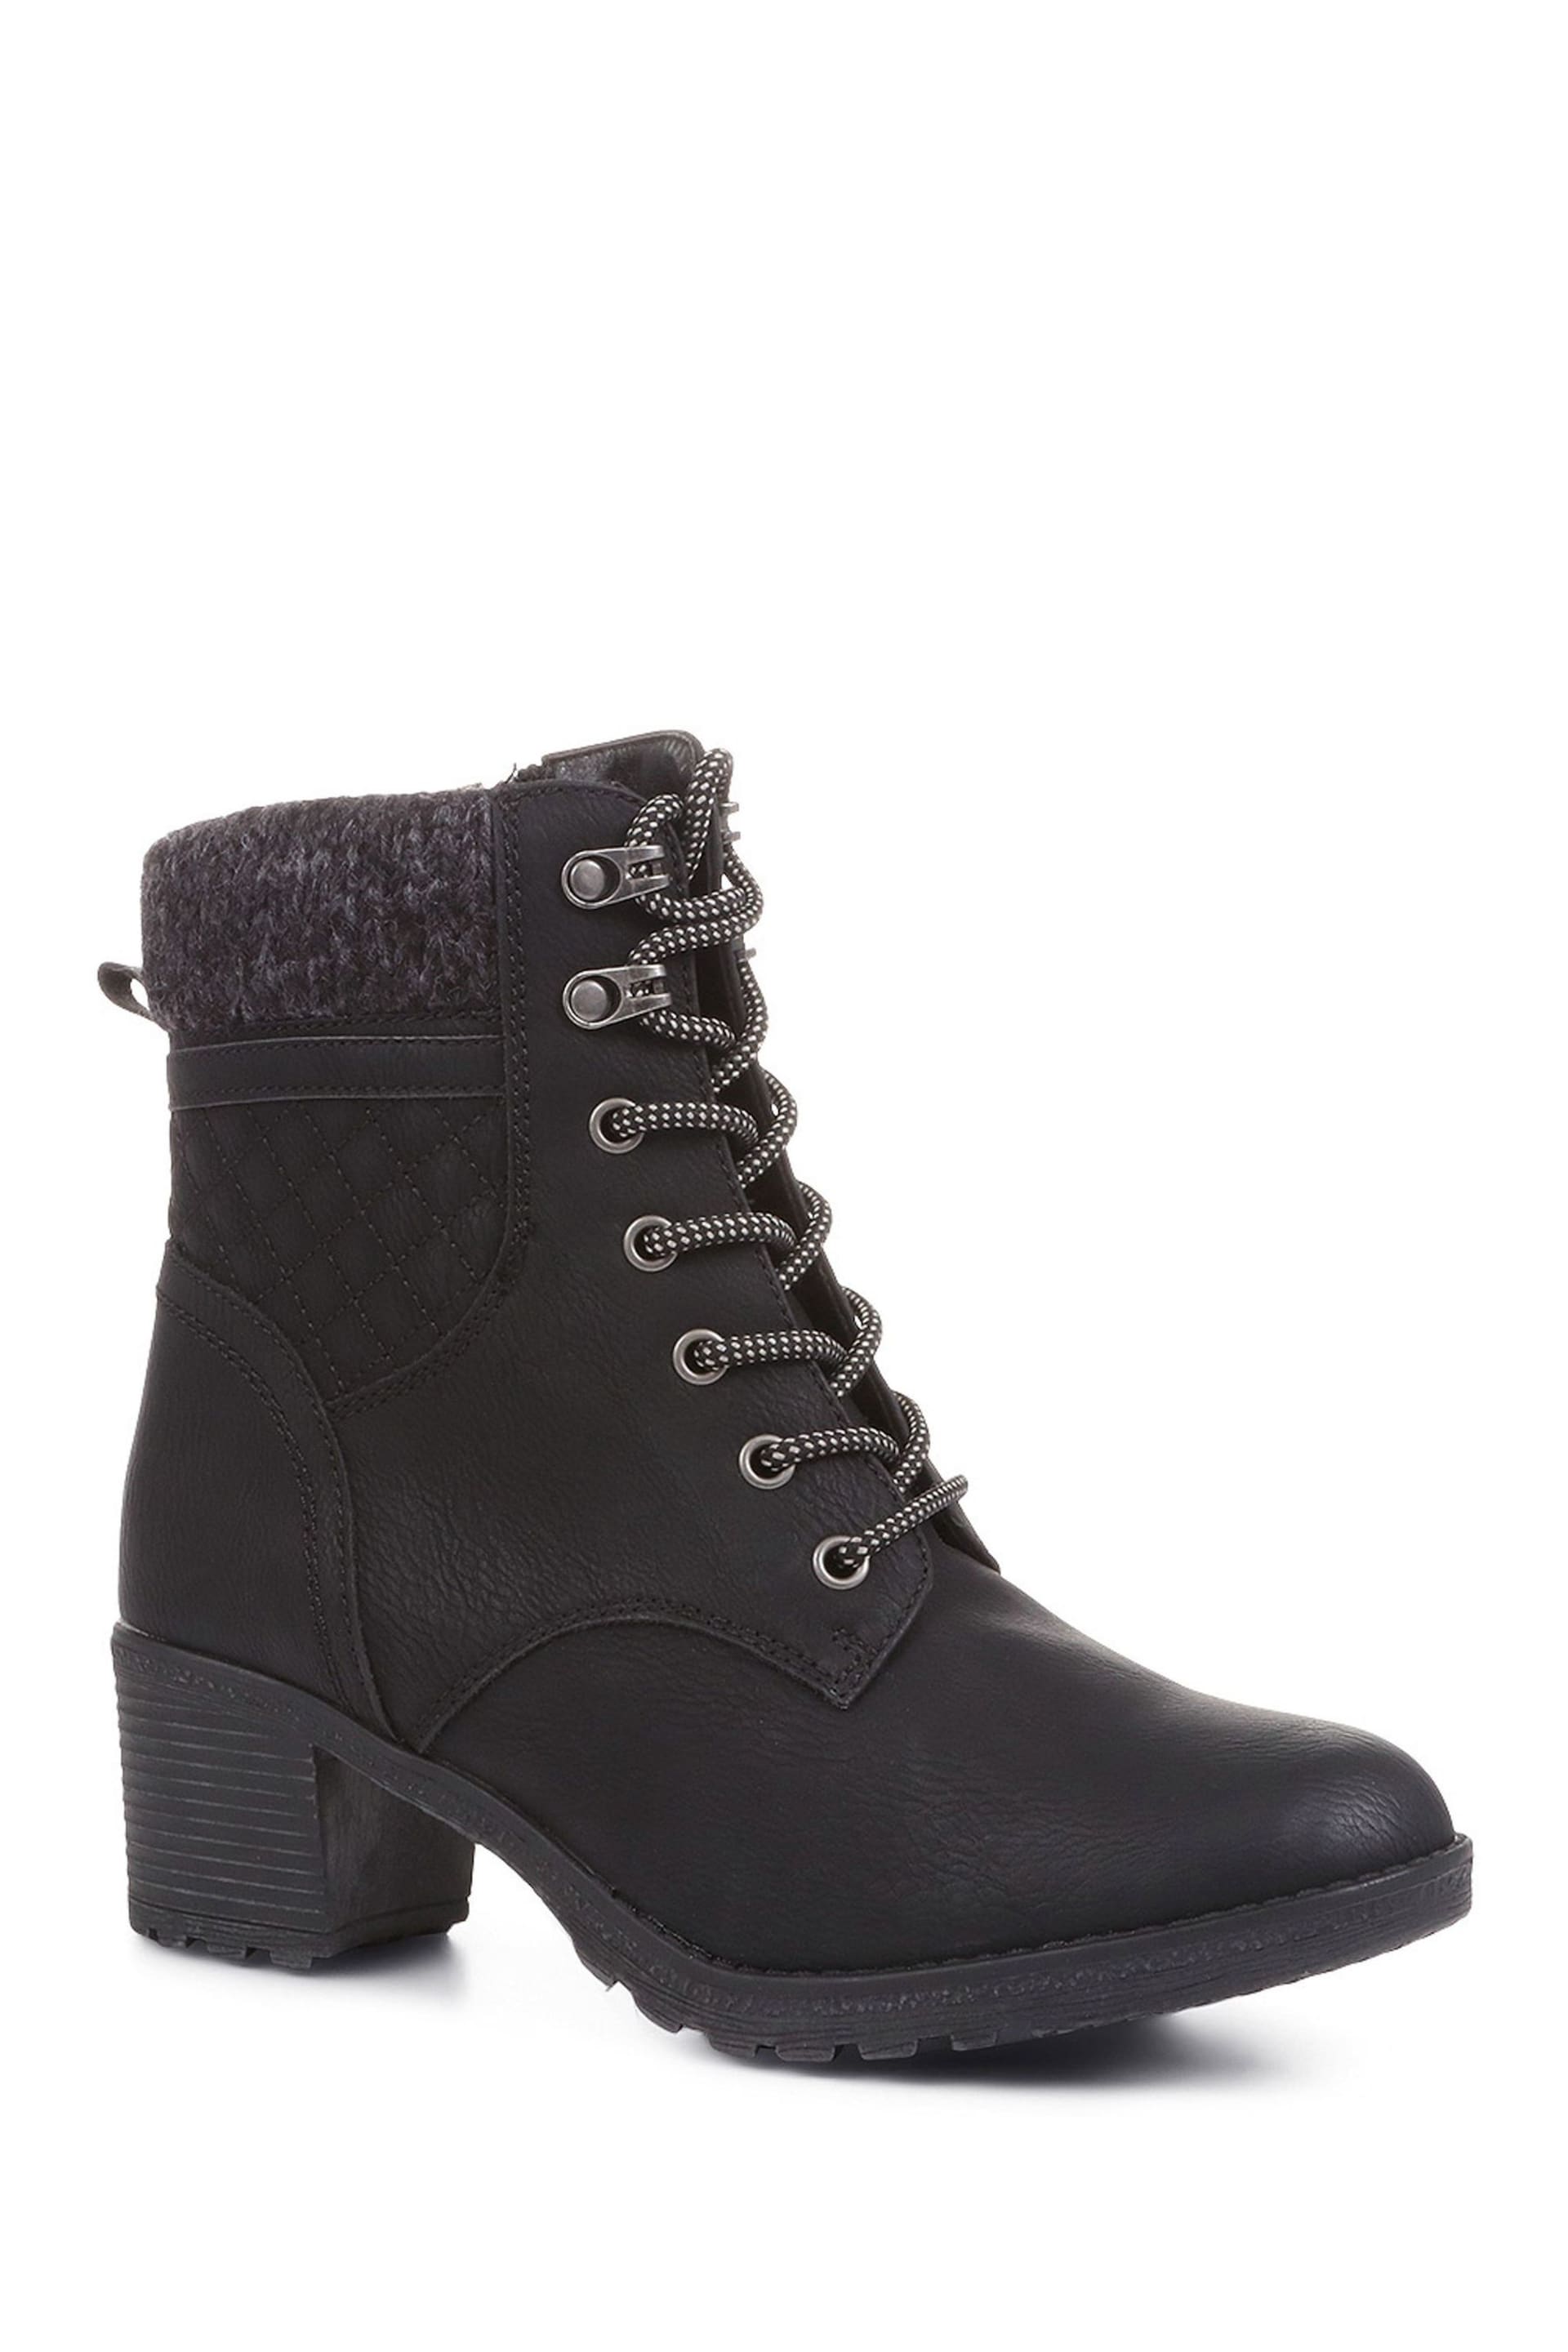 Pavers Lace-Up Ankle Black Boots - Image 1 of 5